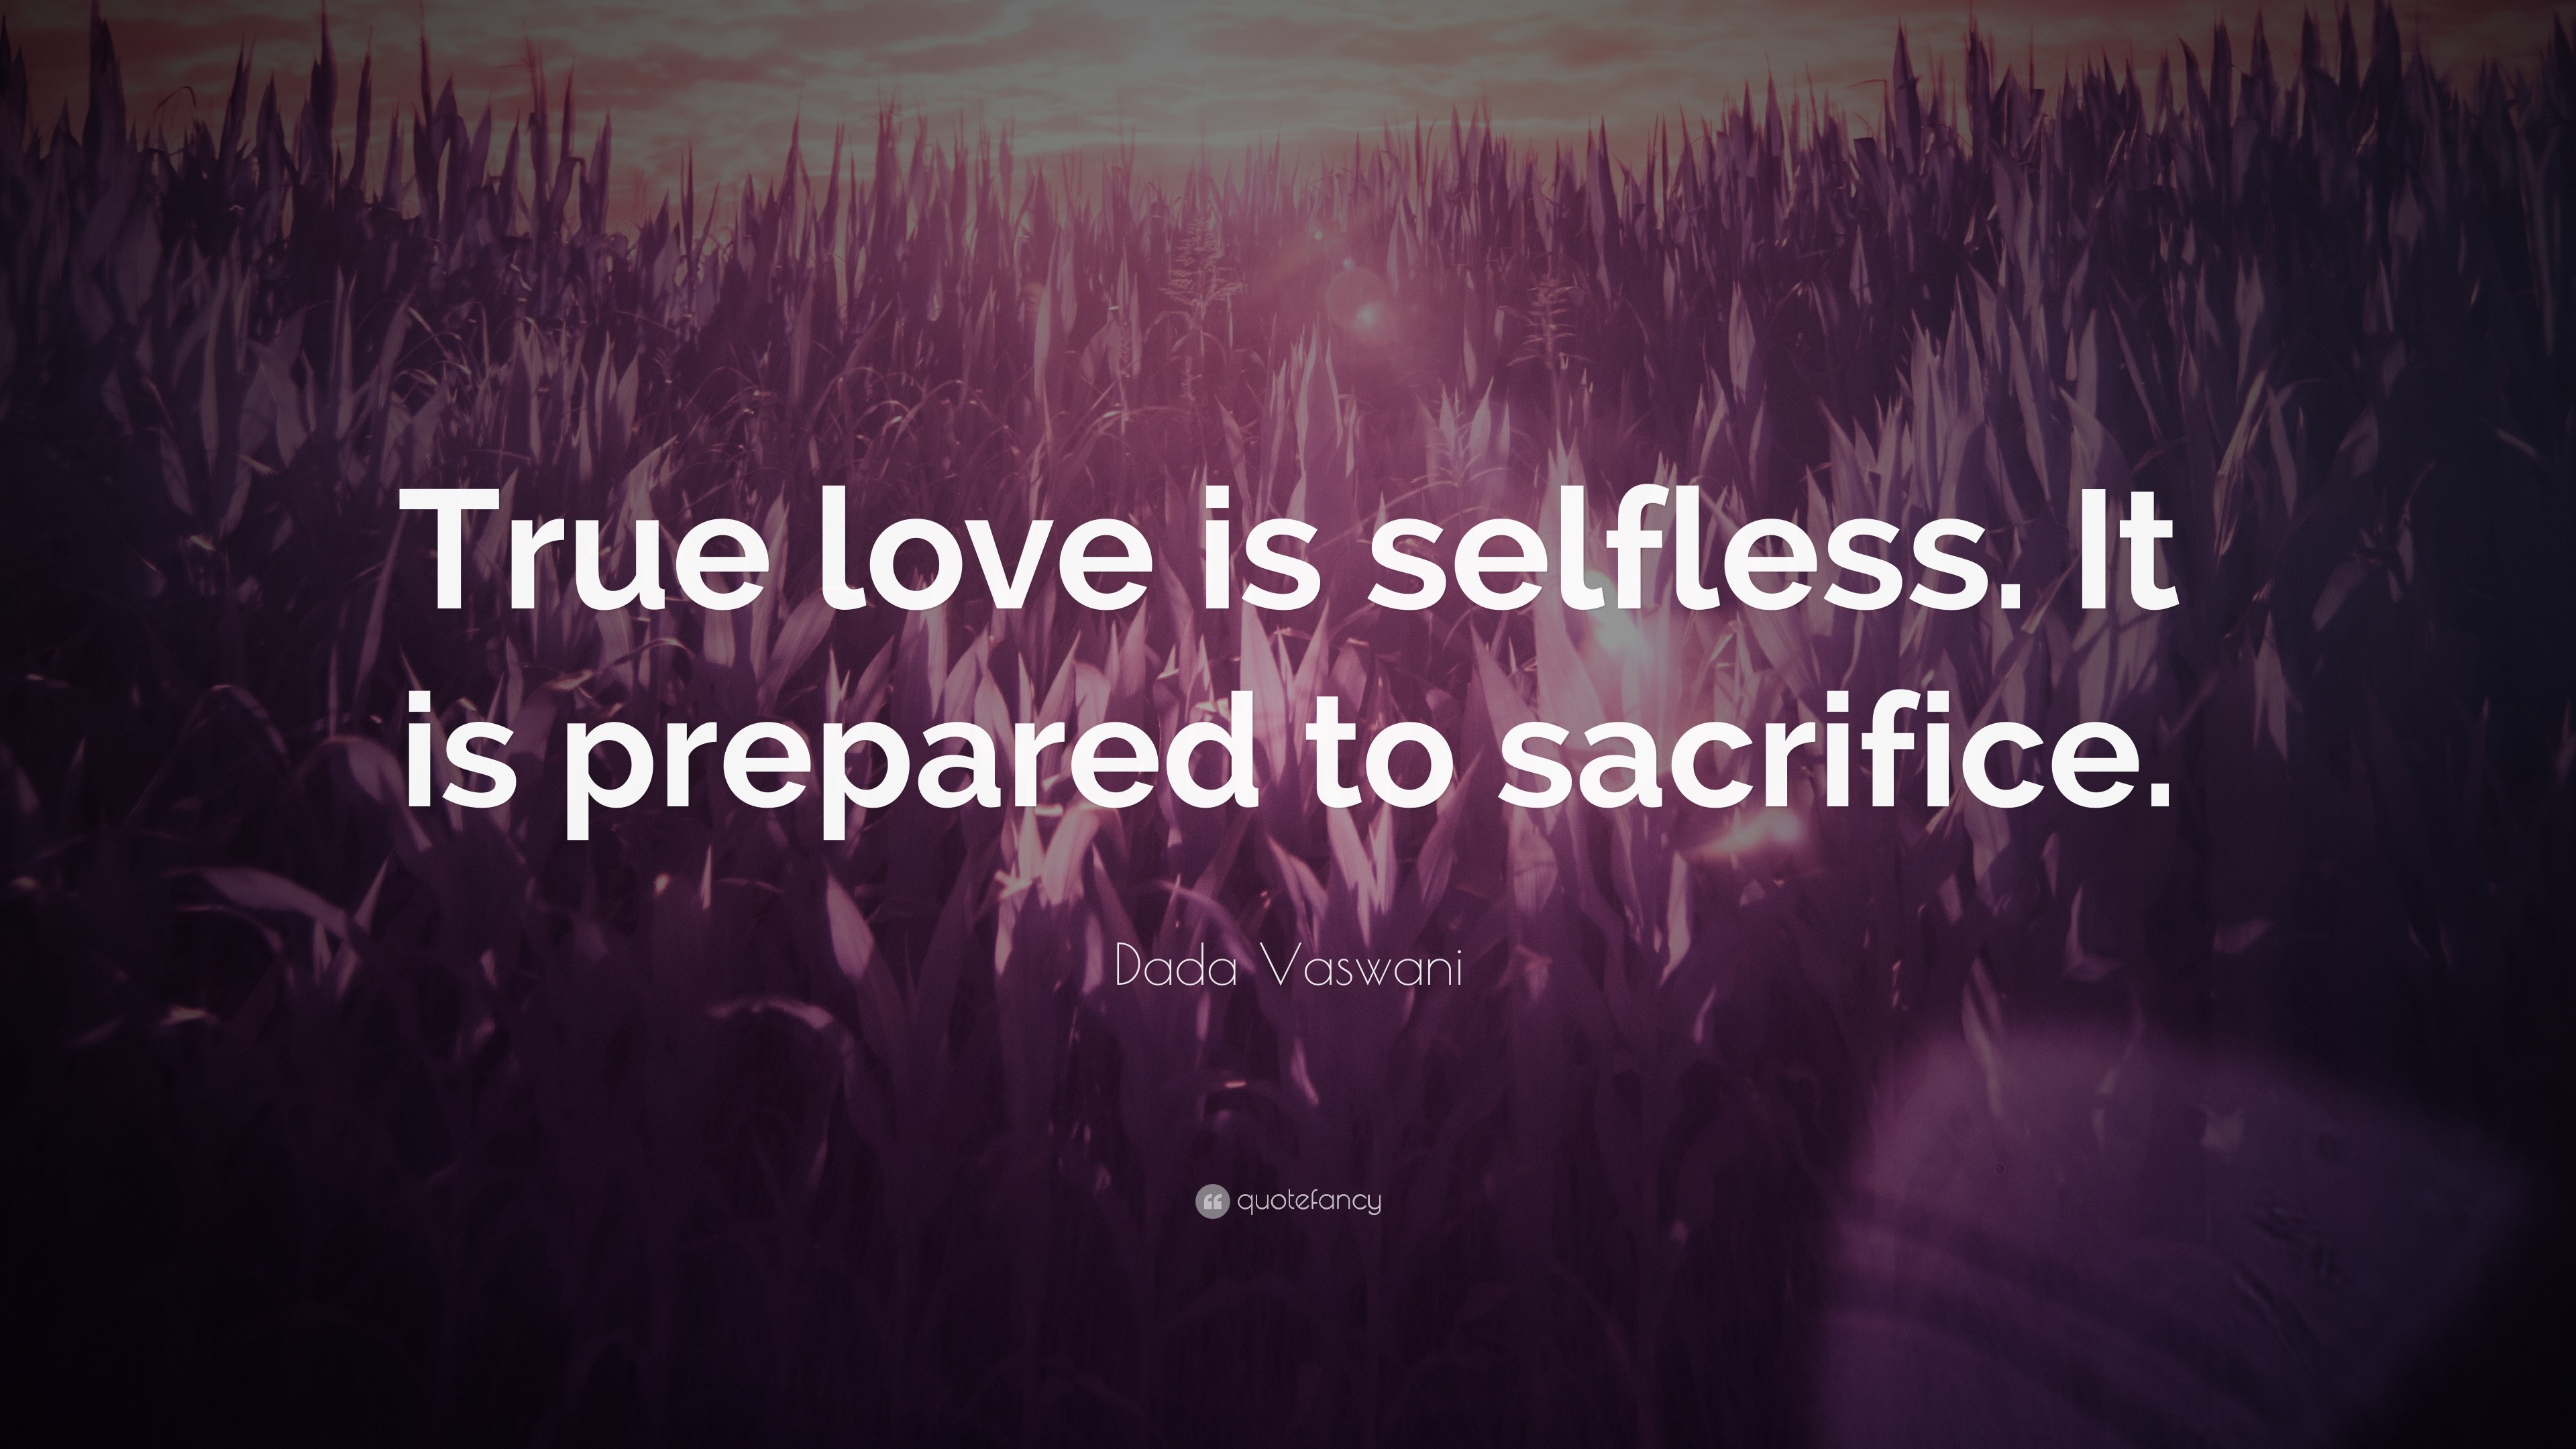 Elegant Quotes On Sacrifice for True Love | Thousands of Inspiration ...